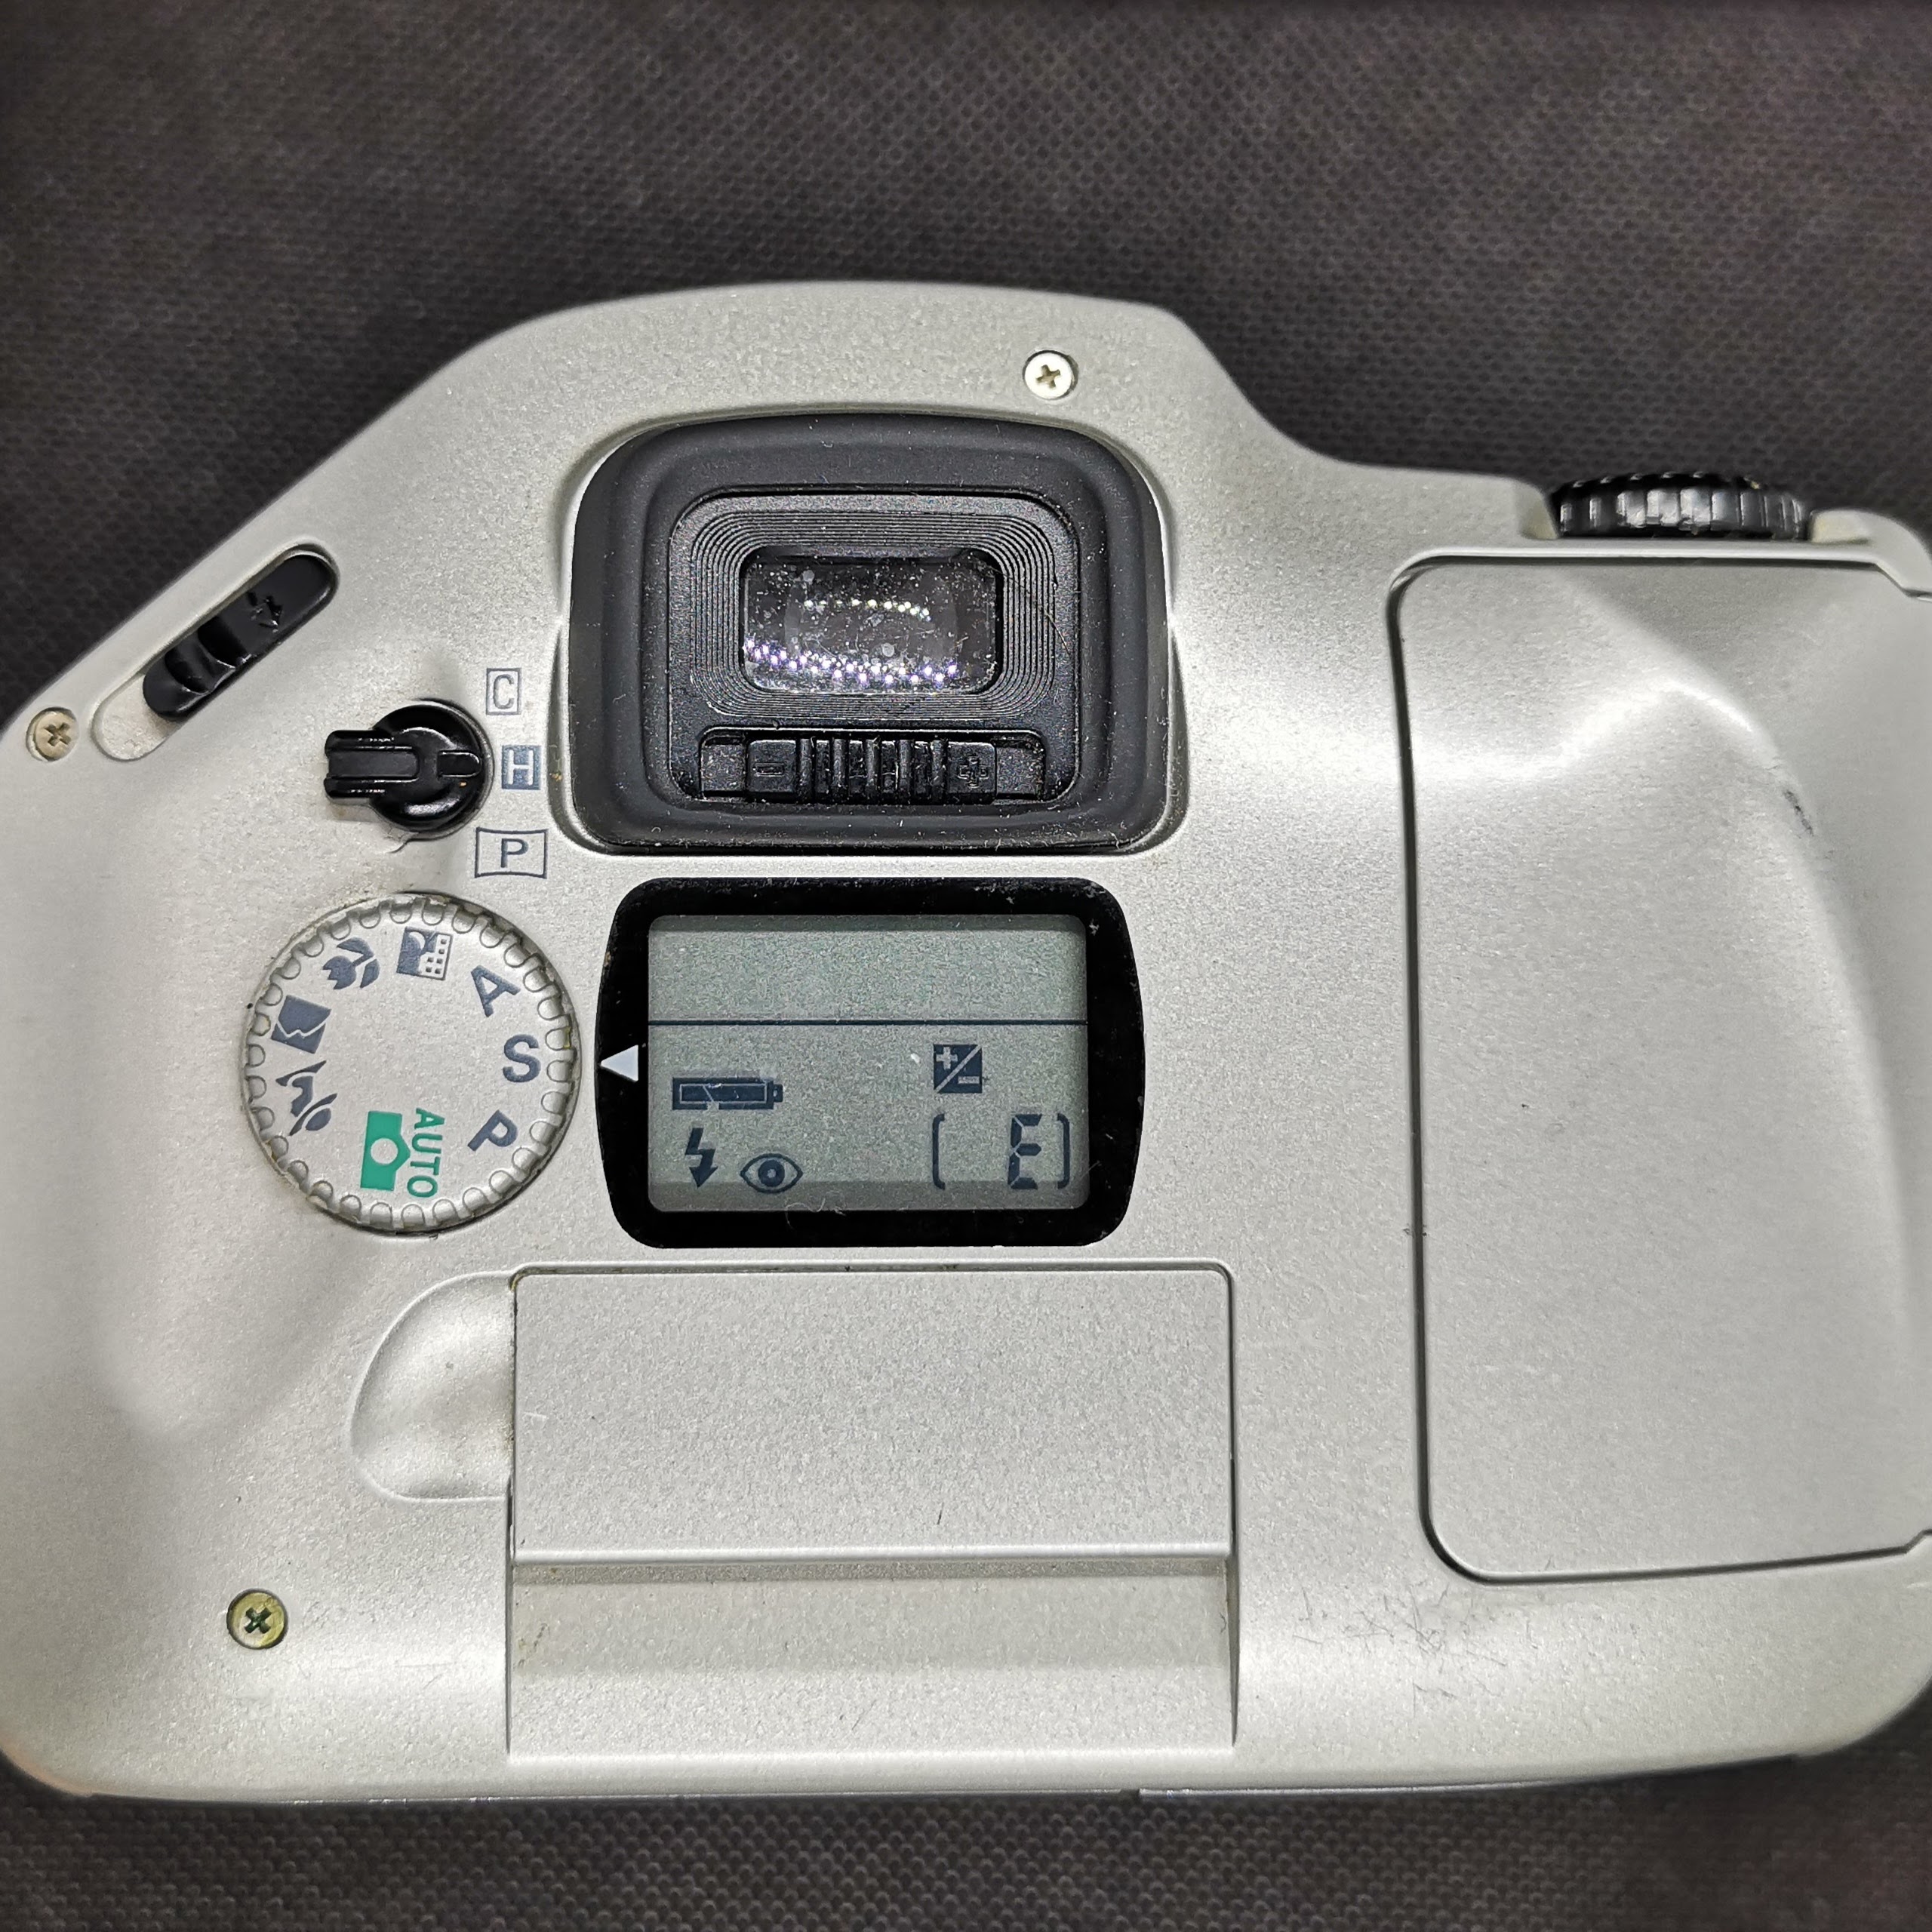 Moral education Goodwill Laws and regulations The SLR that time would Rather Forget - The Nikon Pronea S Review - Canny  Cameras